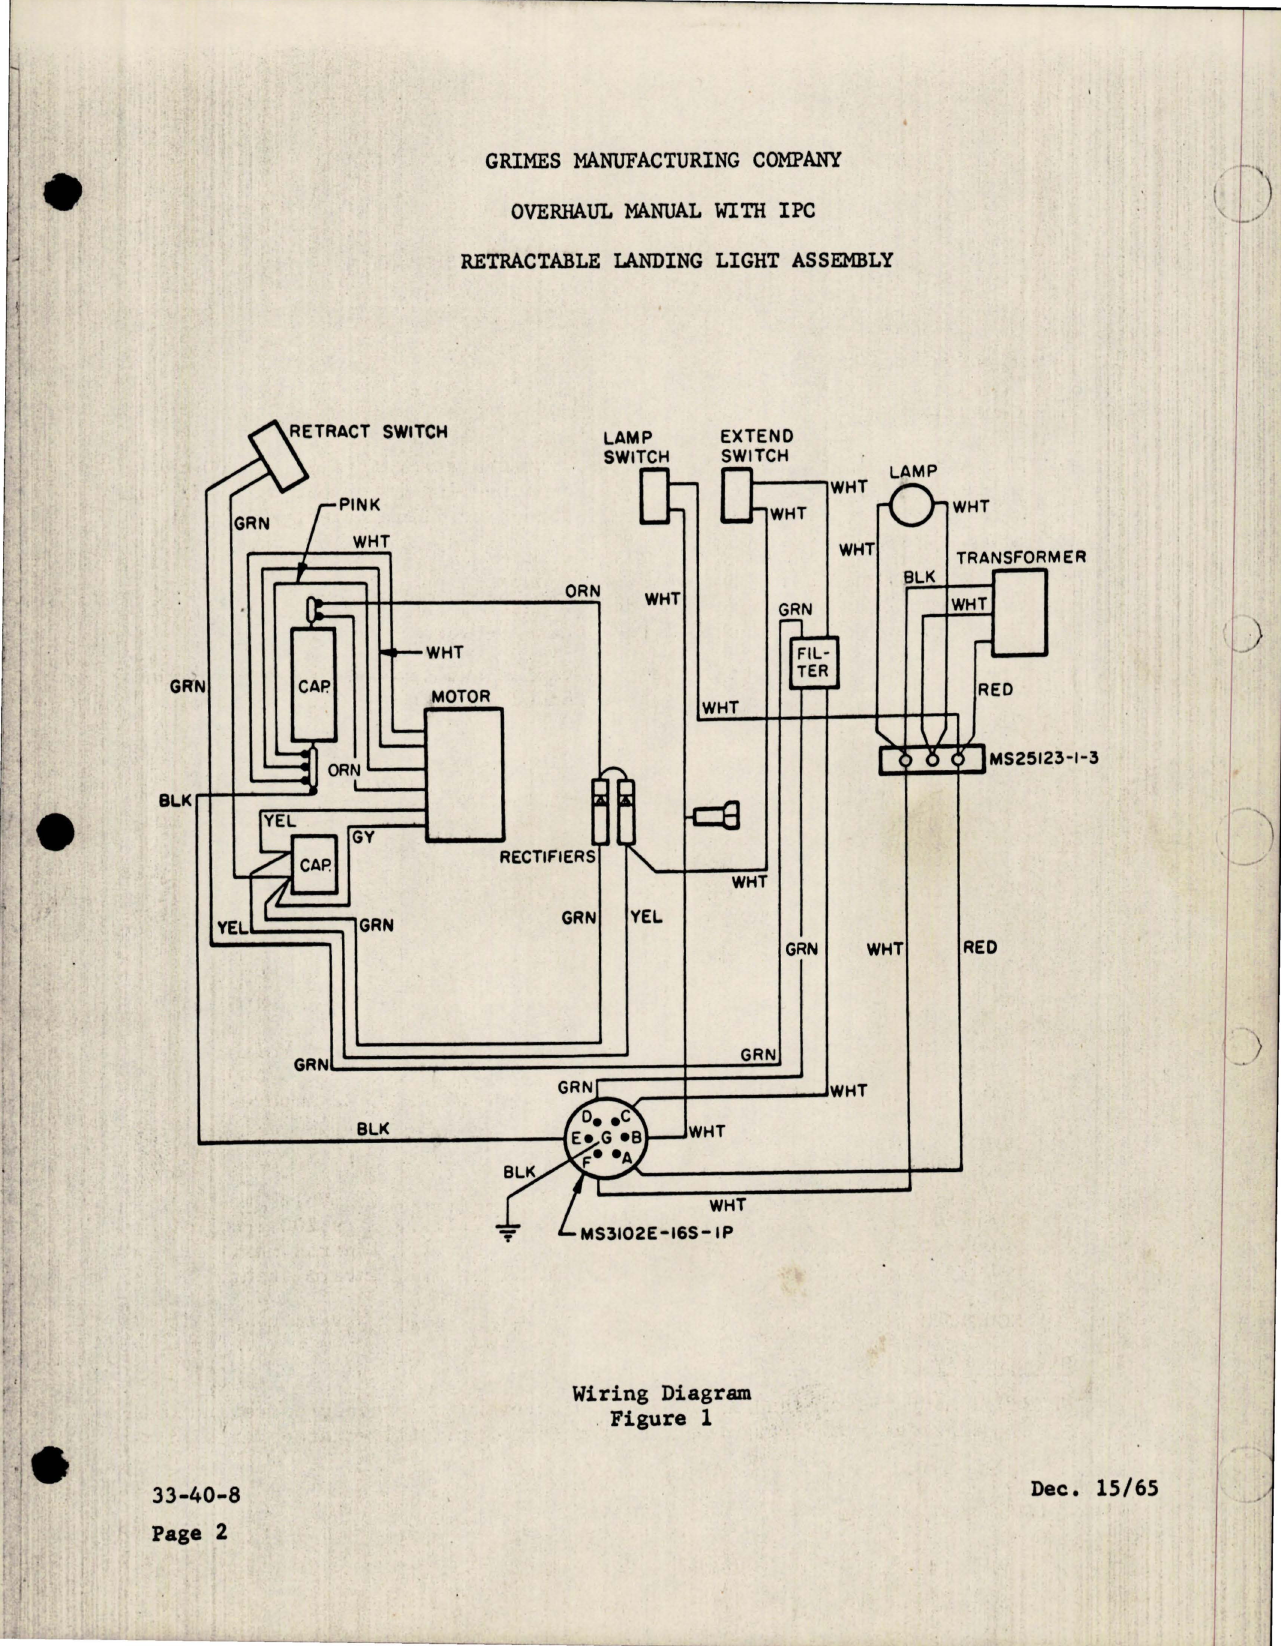 Sample page 5 from AirCorps Library document: Overhaul Manual for Retractable Landing Light Assembly - Parts 45-0057-1 and 45-0057-3